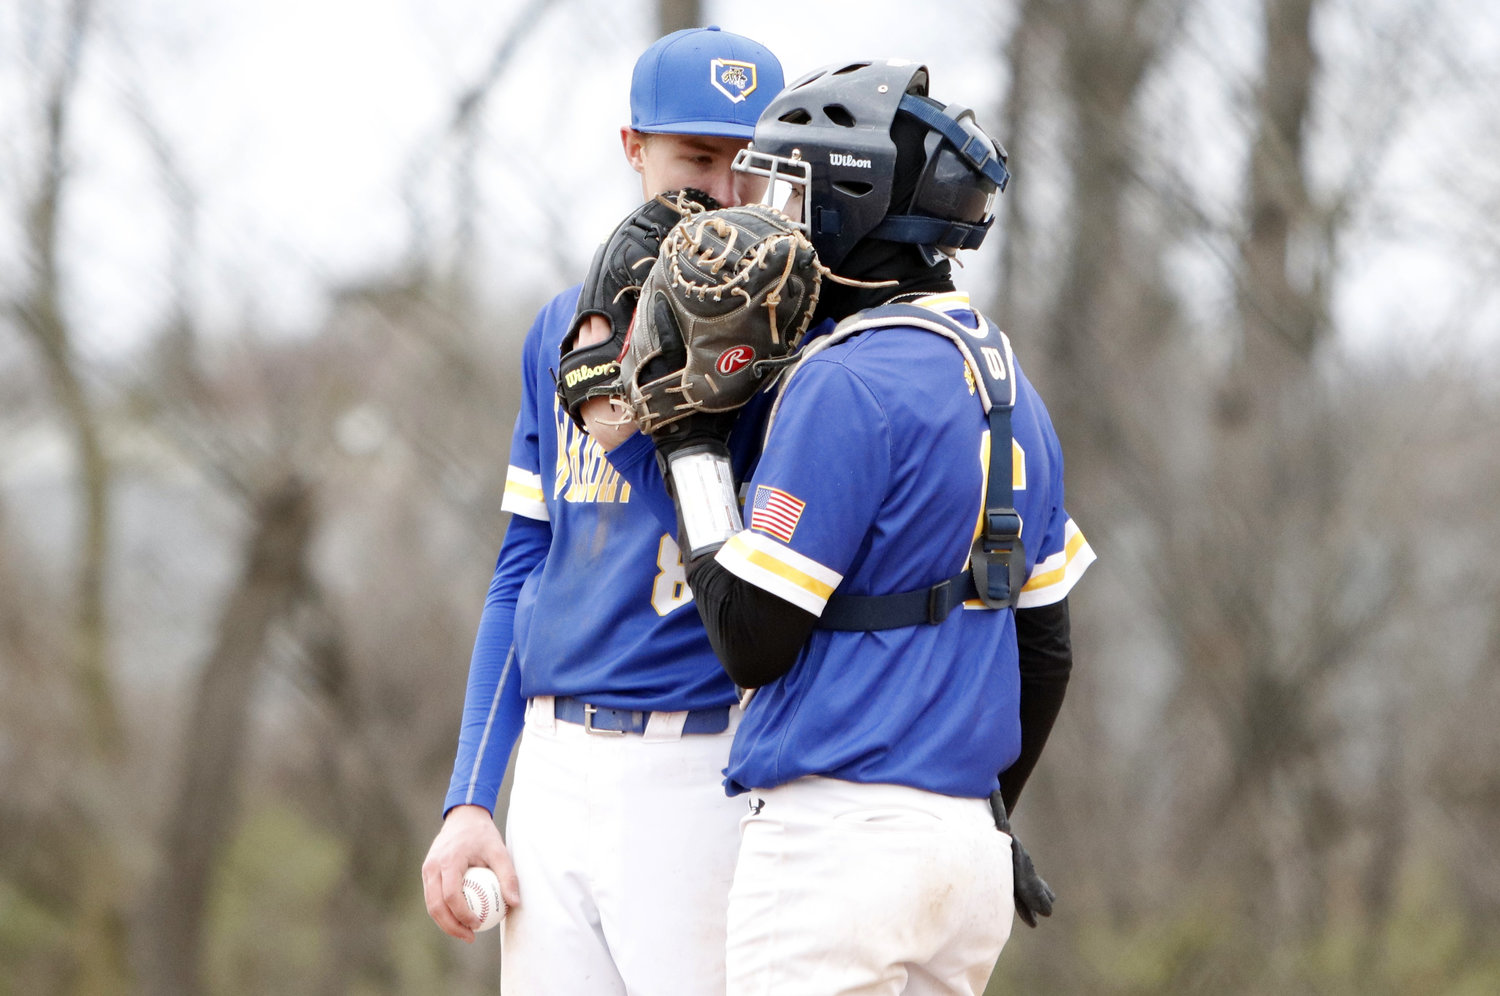 Wright City starting pitcher Trey Brakensiek (left) meets with catcher Jack Goughenour during the early innings of Saturday's game.